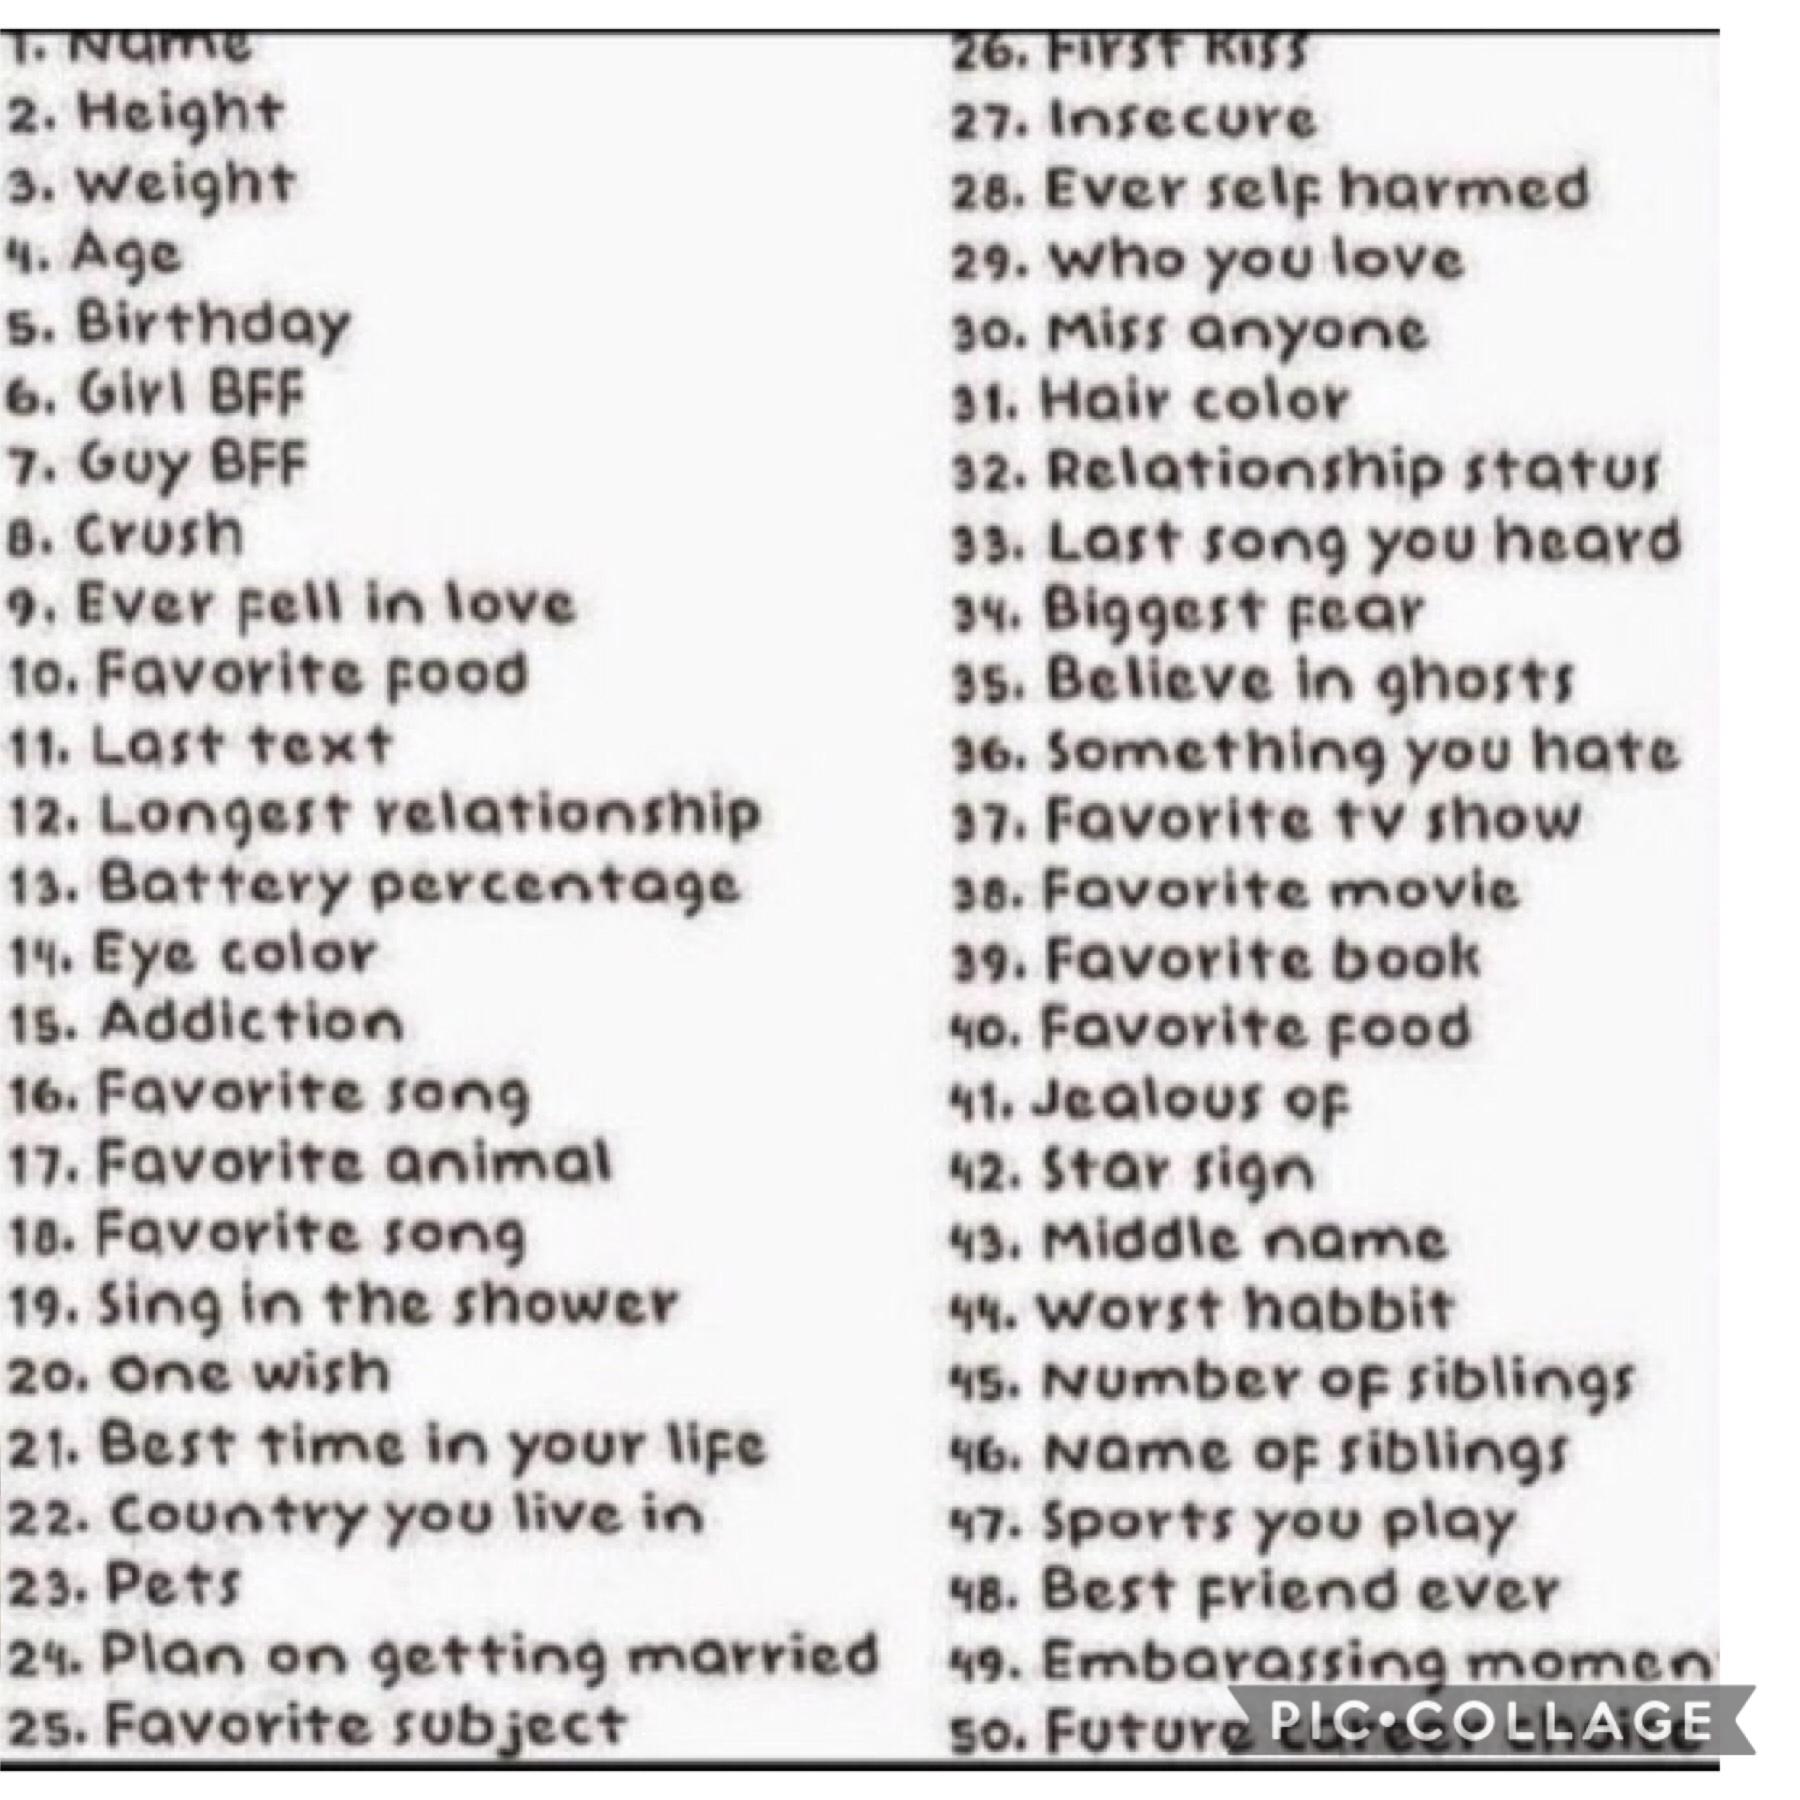 Type a number  and I’ll answer in comments!